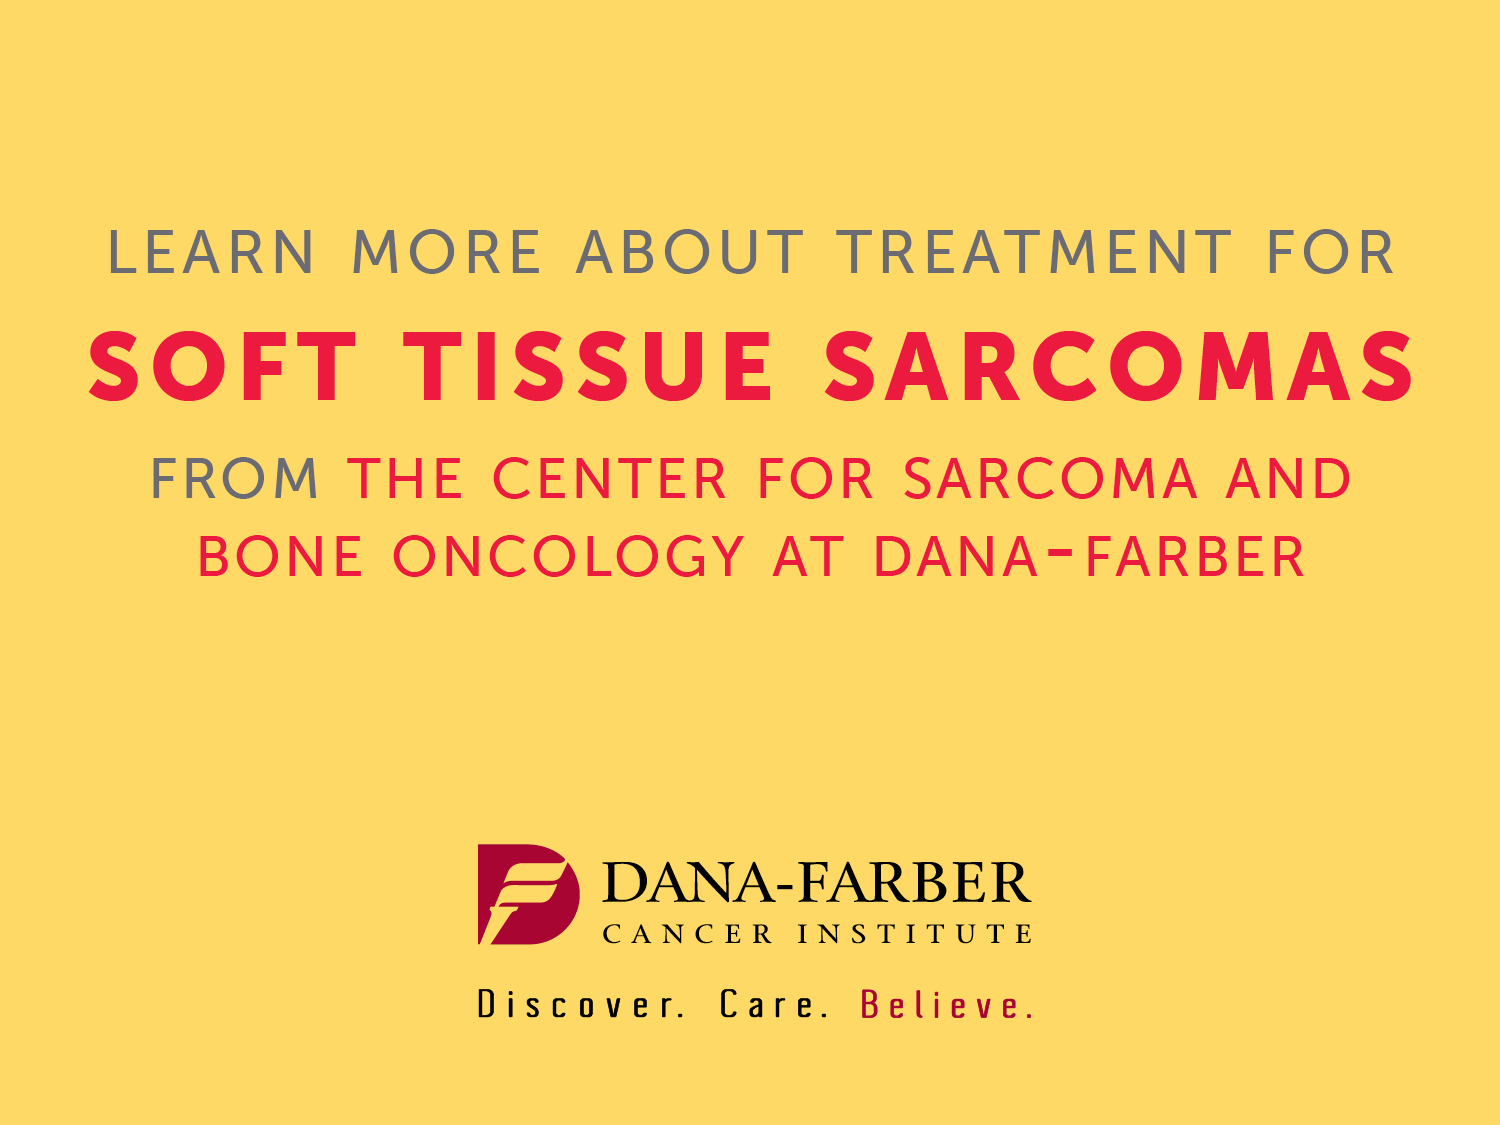 Learn more from Dana-Farber's Center for Sarcoma and Bone Oncology